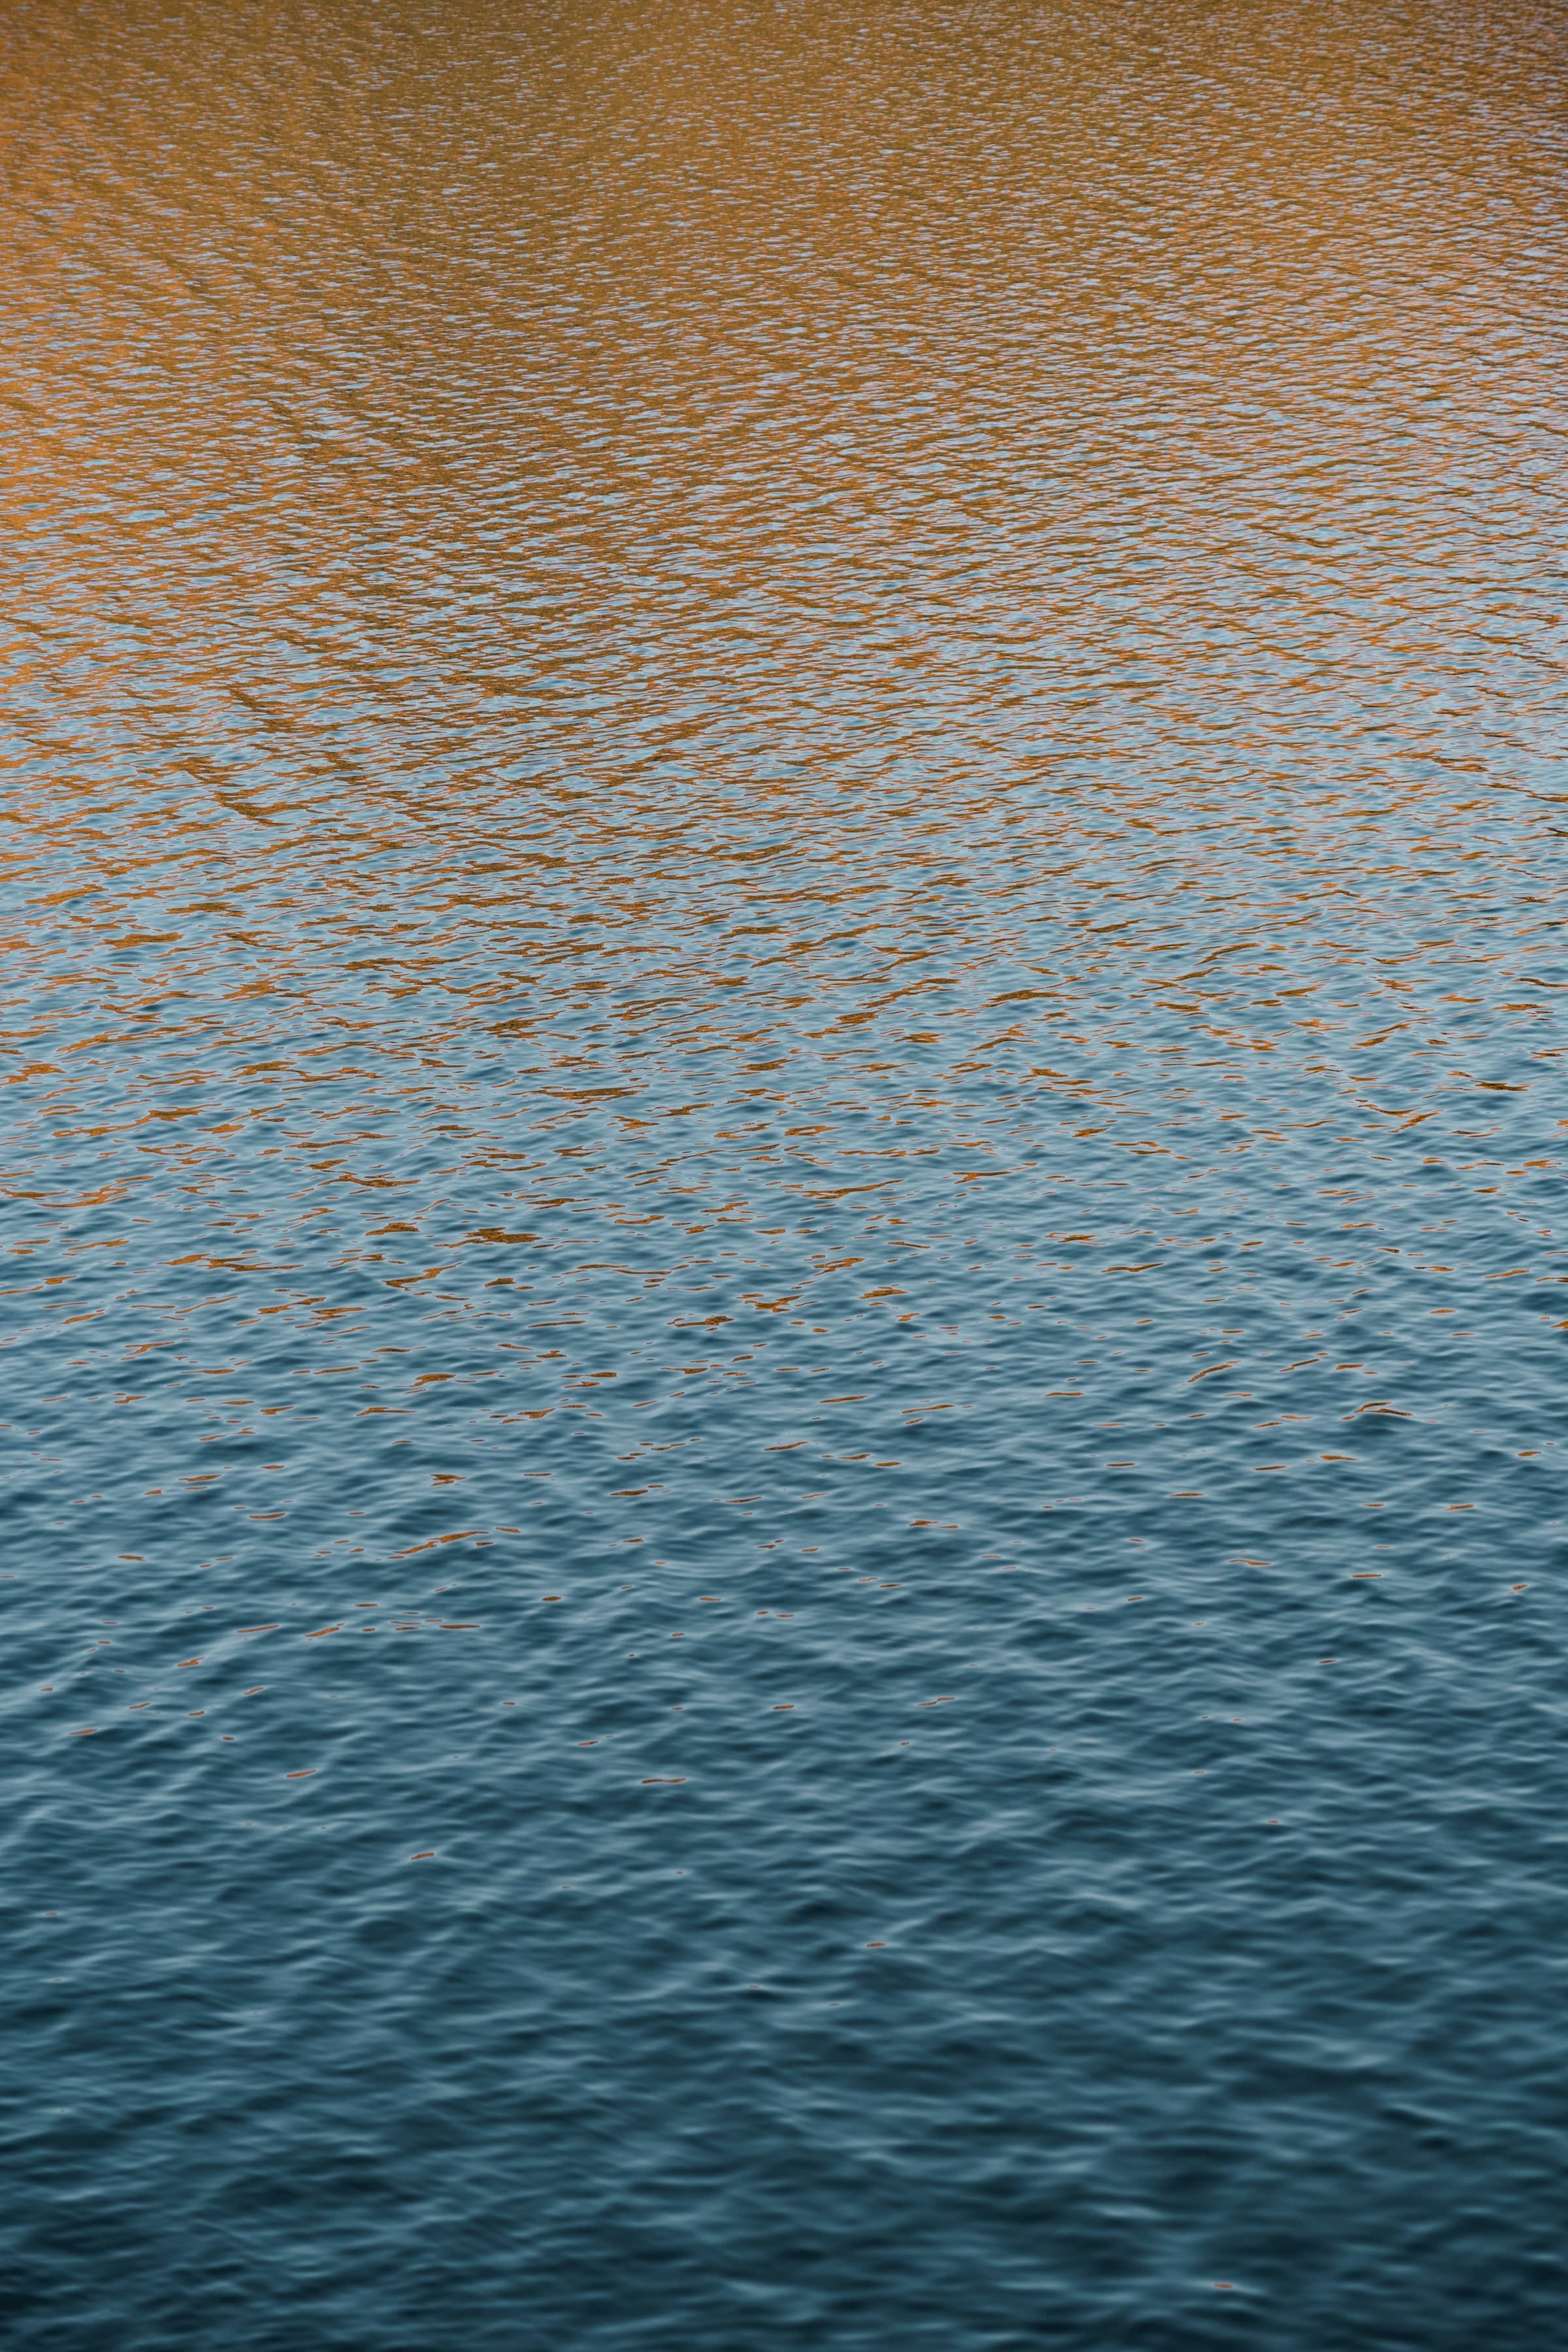 Close up of mildly rippling water with a tint of gold at the top gradienting down to a deep teal at the bottom.